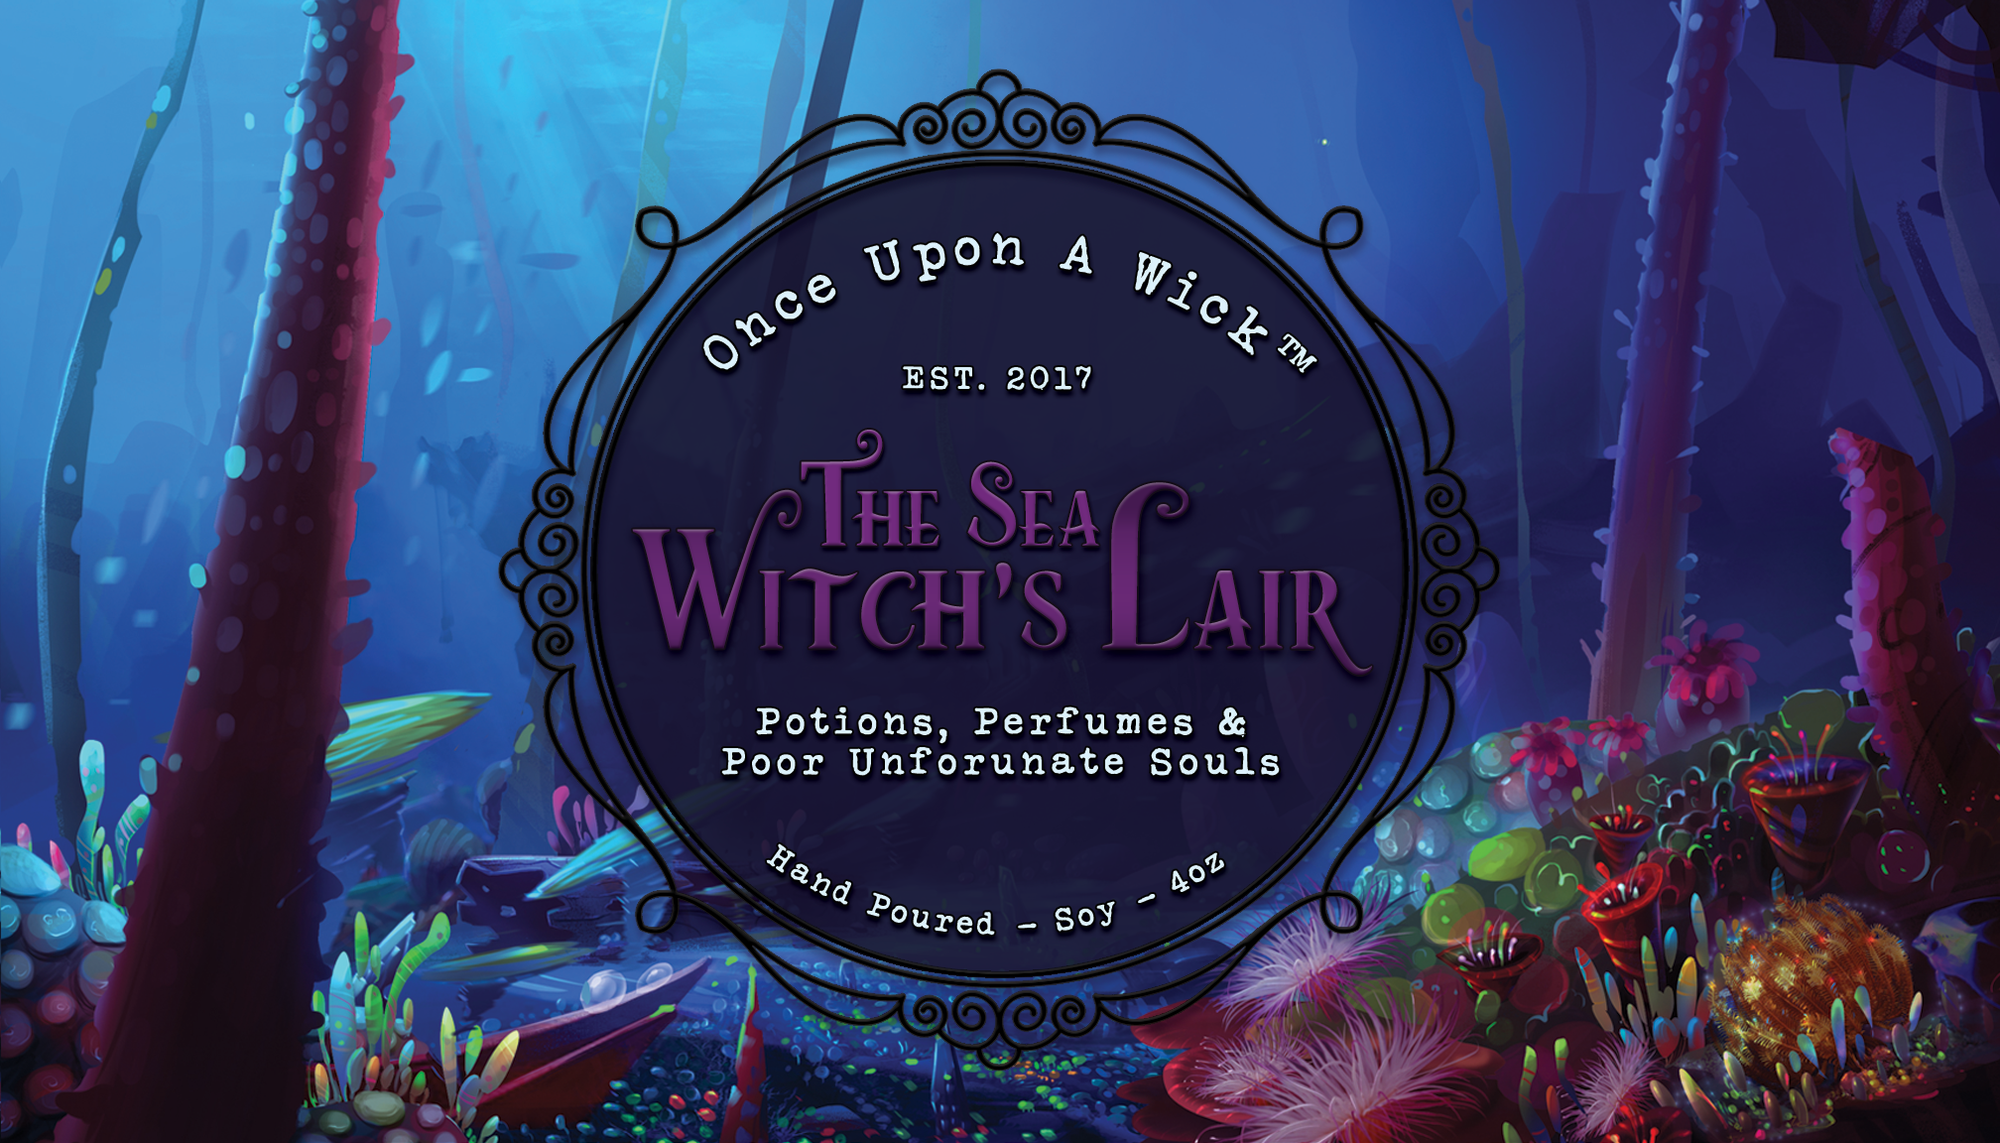 The Sea Witch's Lair | The Little Mermaid Inspired